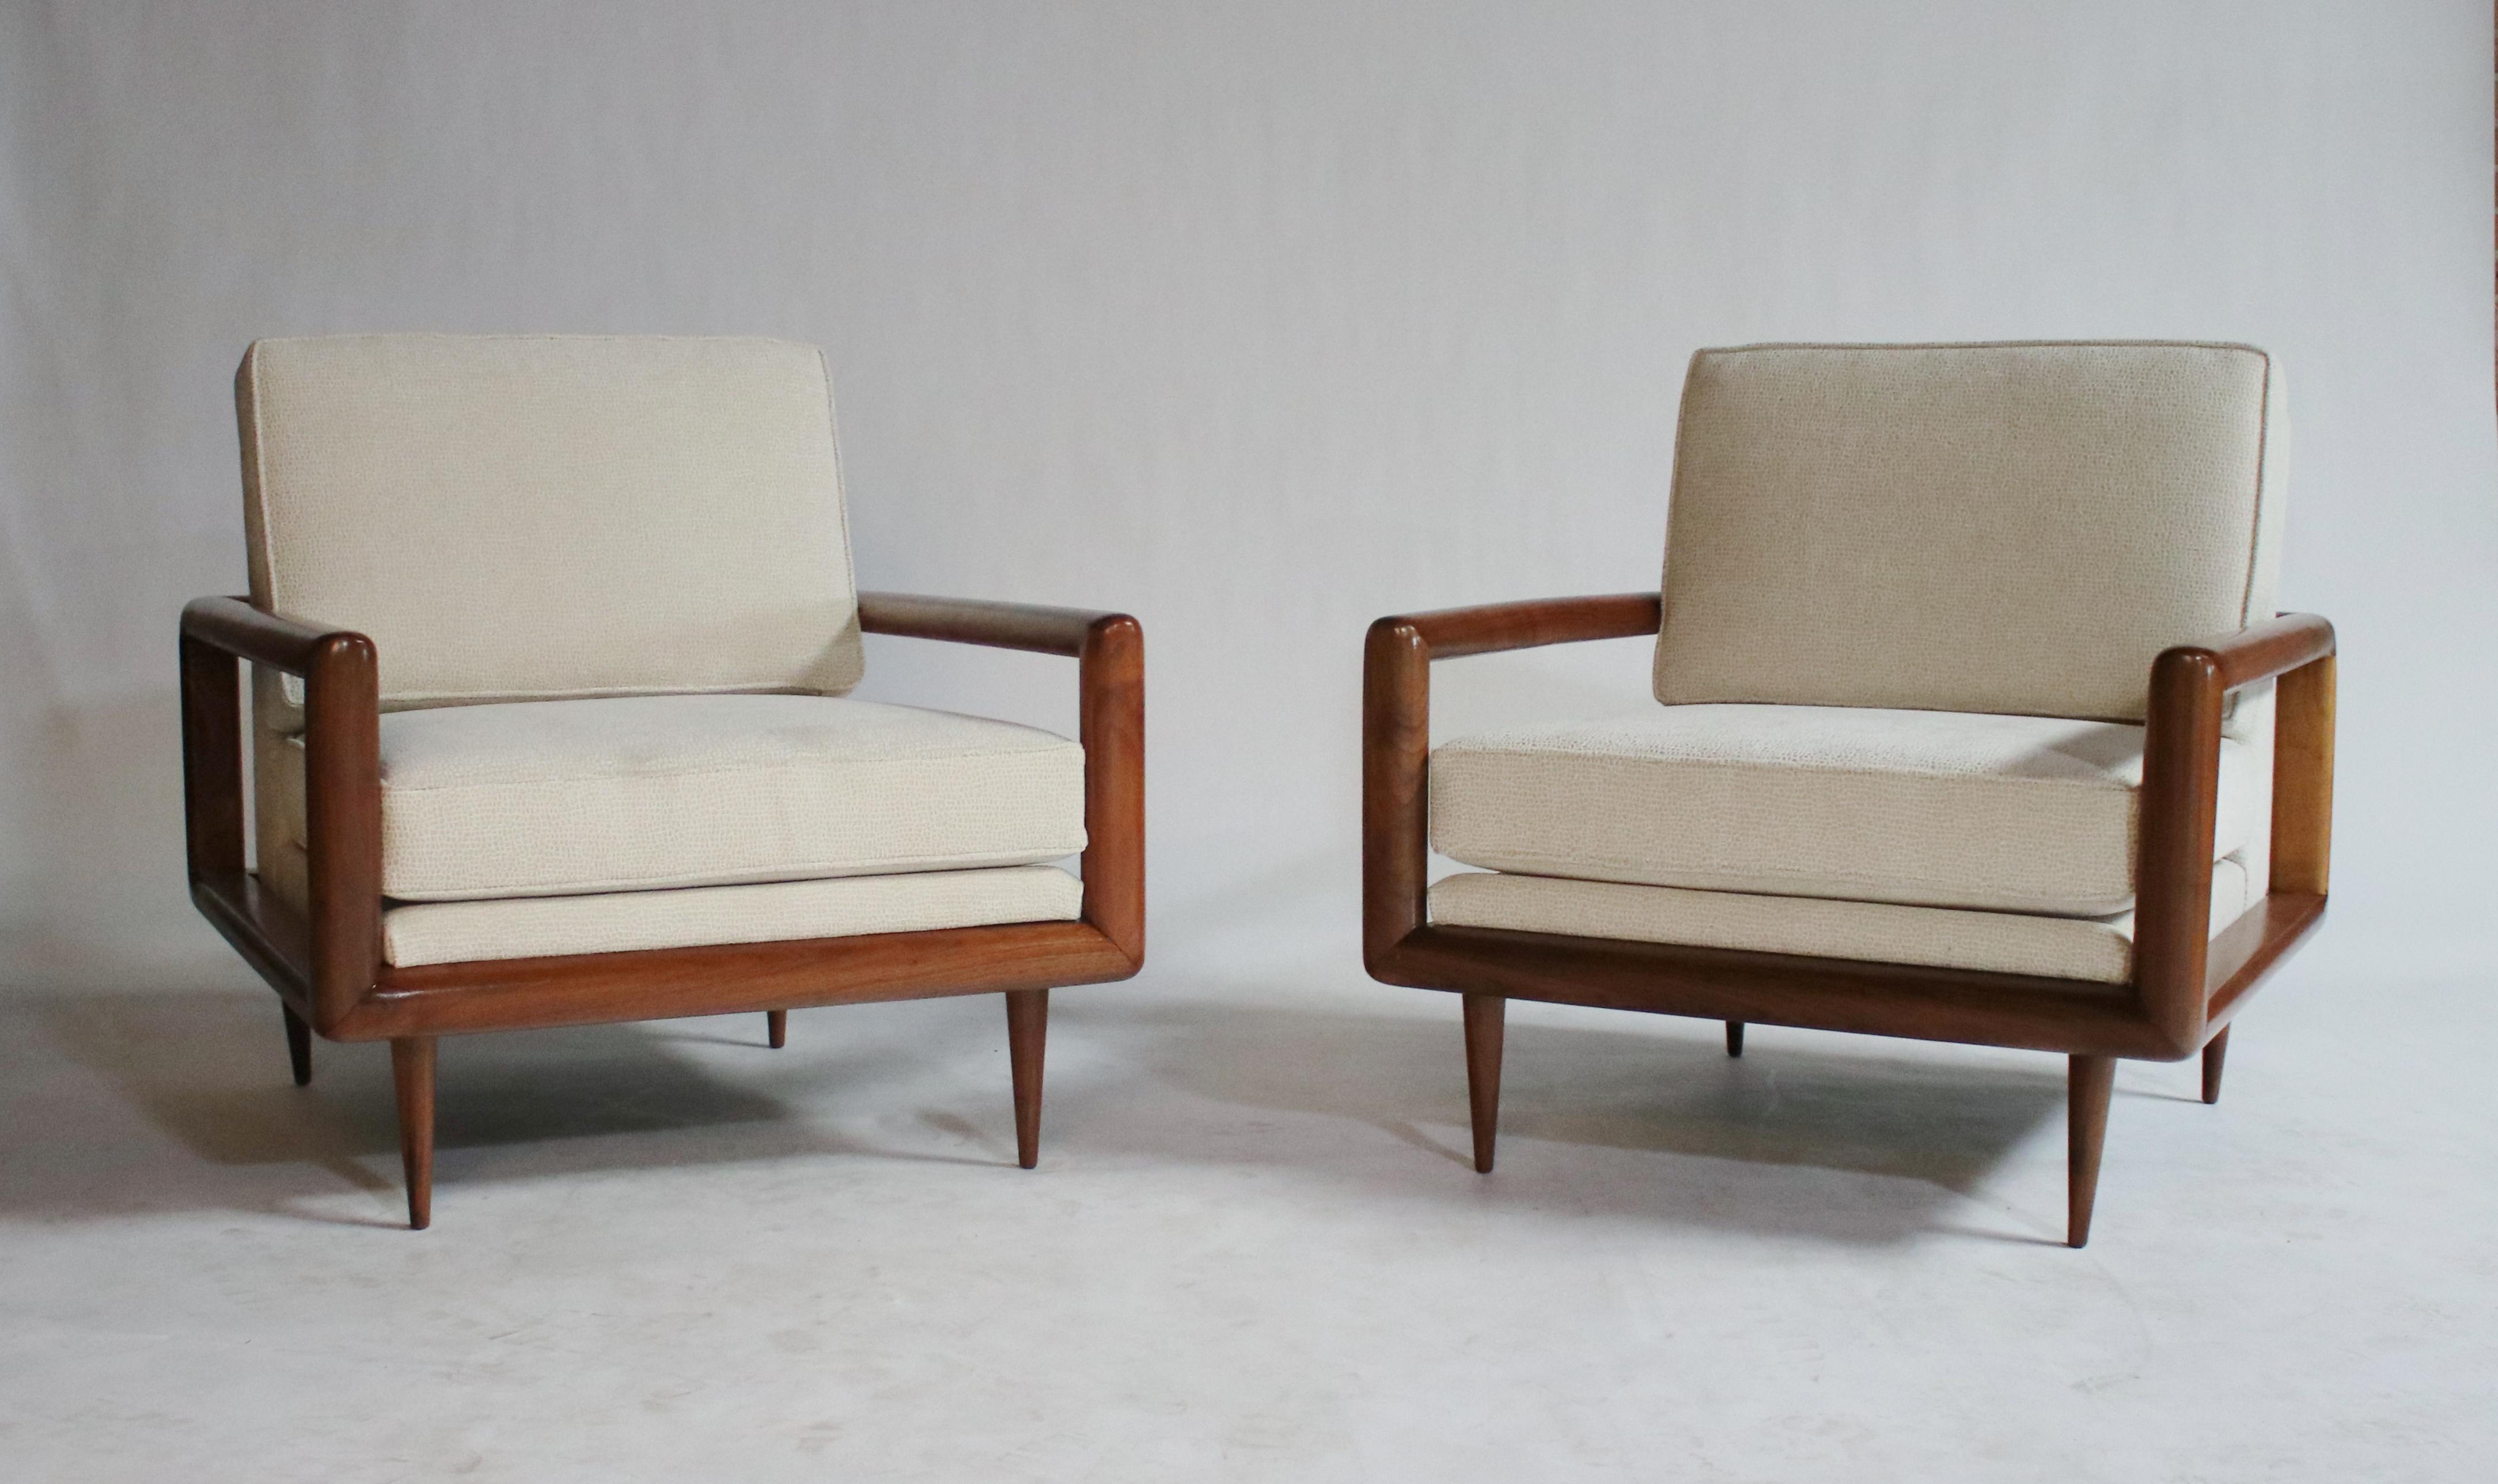 Unique and stylish modern design looks stunning from every angle, these Mid-Century Modern open arm lounge chairs are made from solid walnut frame with tapered legs and newly upholstered in designer textured fabric. In the style of T.H. Robsjohn